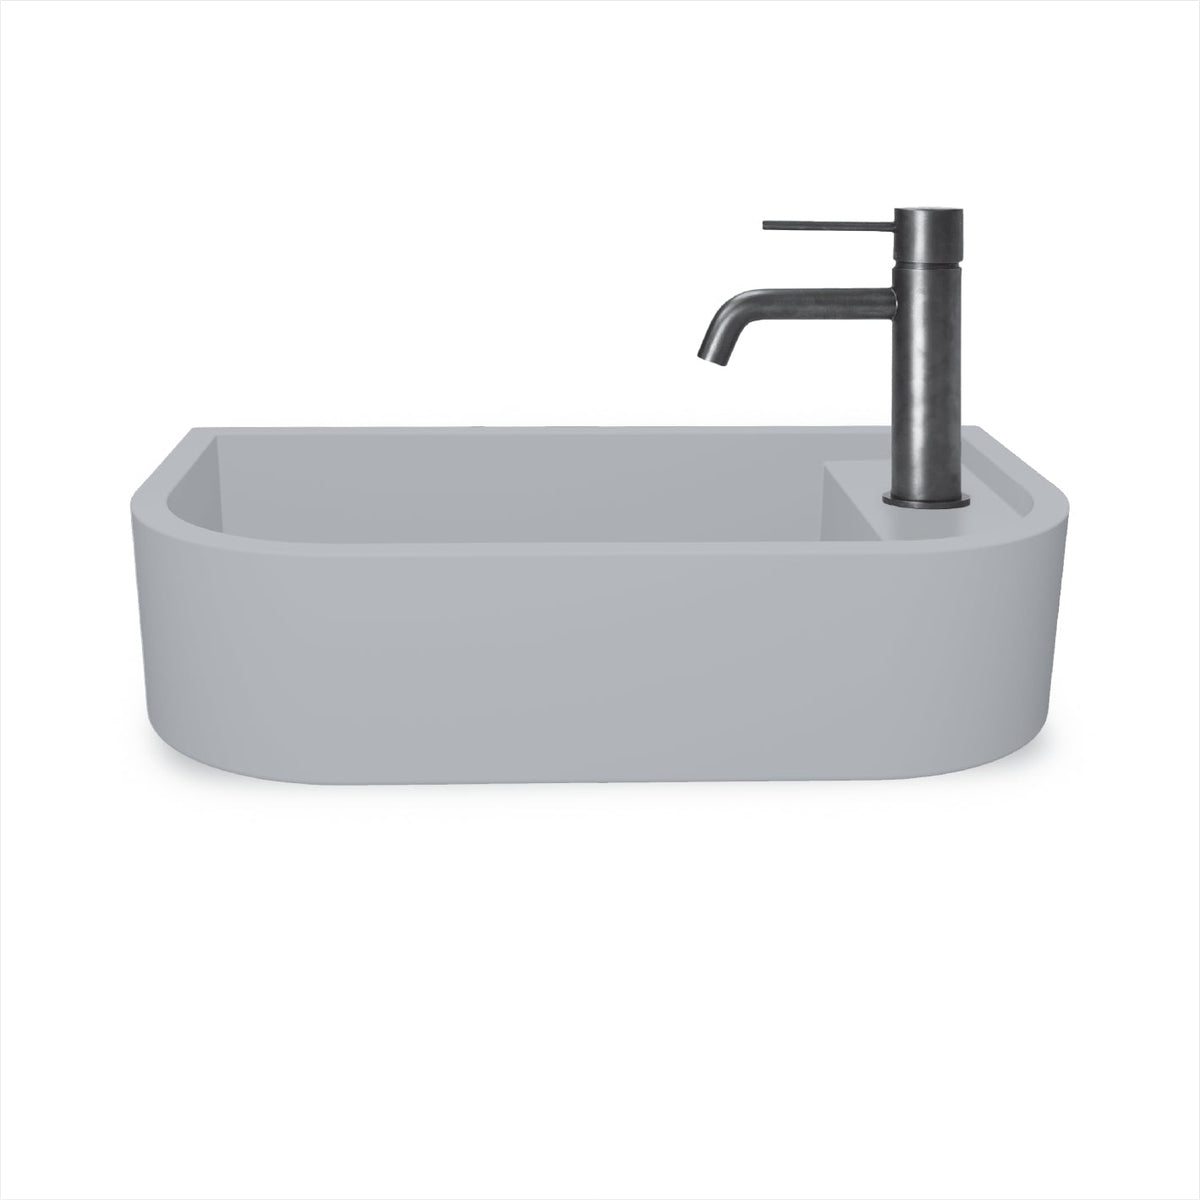 Loop 02 Basin - Overflow - Wall Hung (Powder Blue,Tap Hole,White)